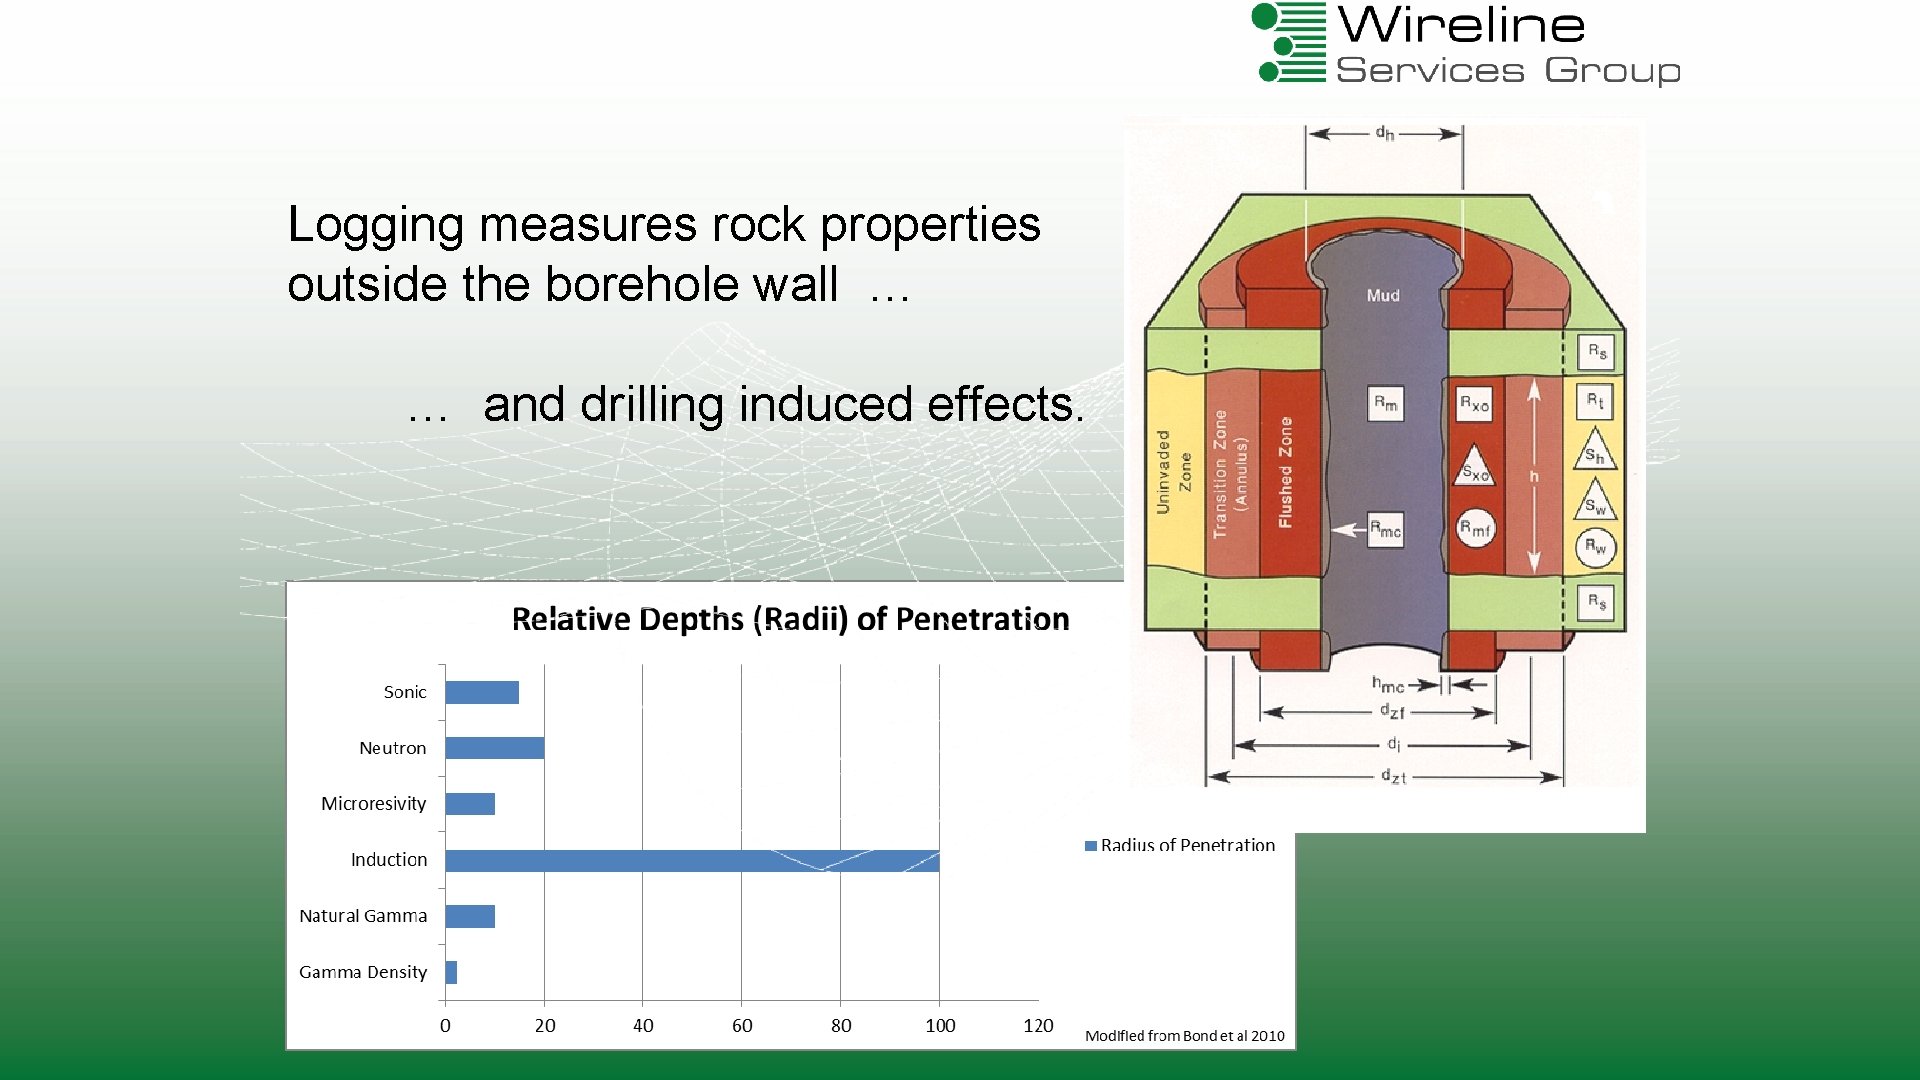 Logging measures rock properties outside the borehole wall … … and drilling induced effects.